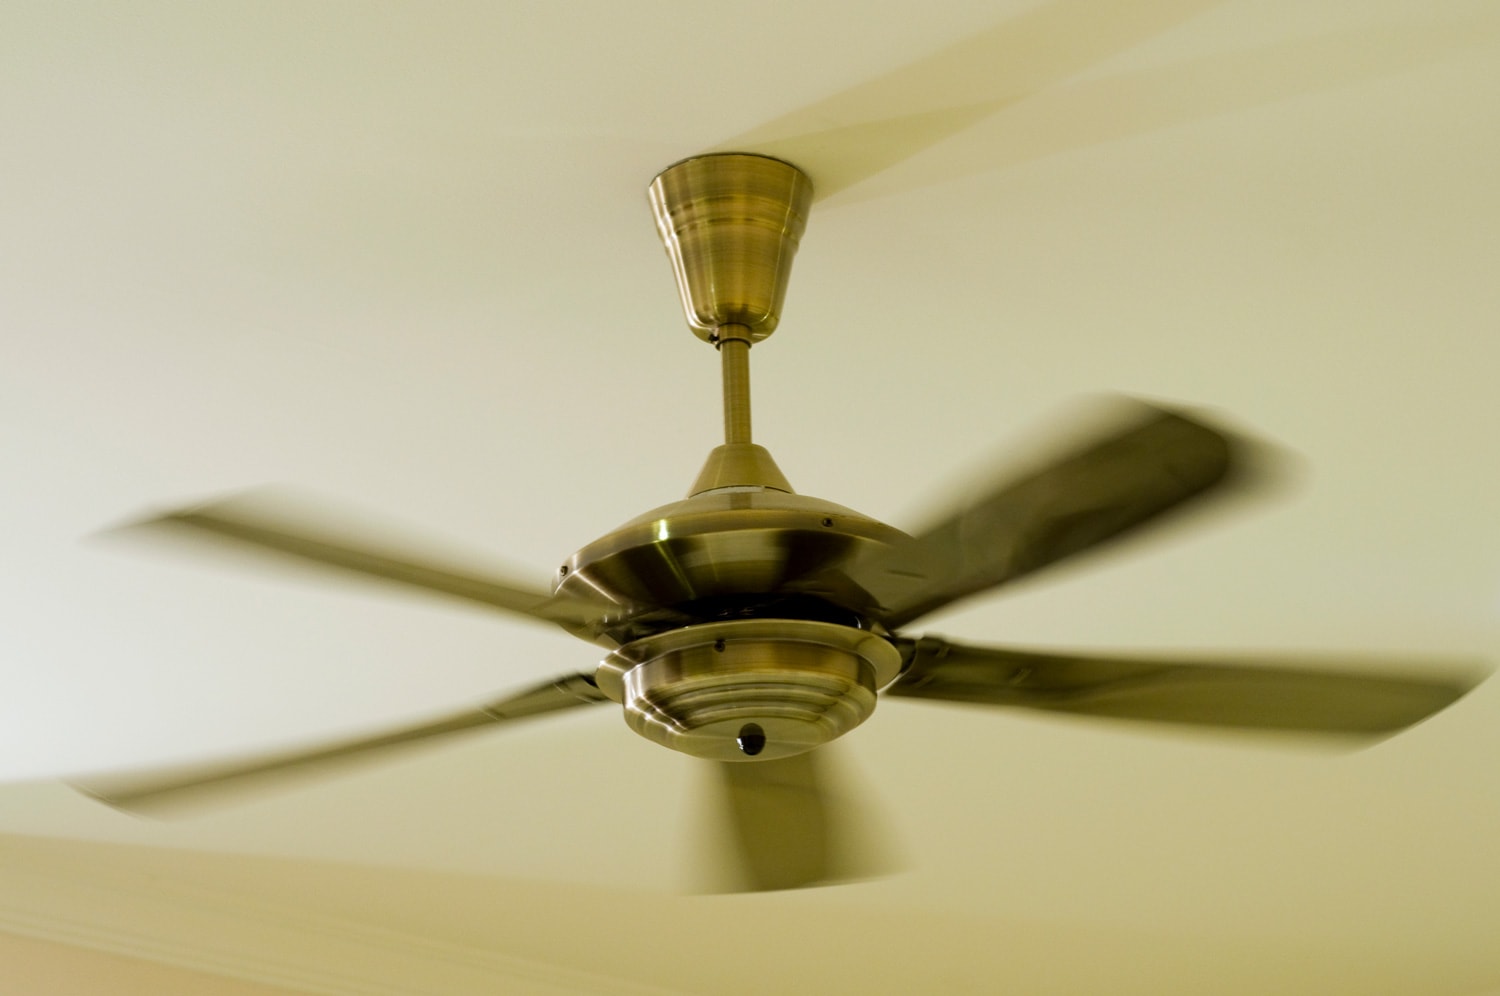 Motion blur on a simple image of a fan.